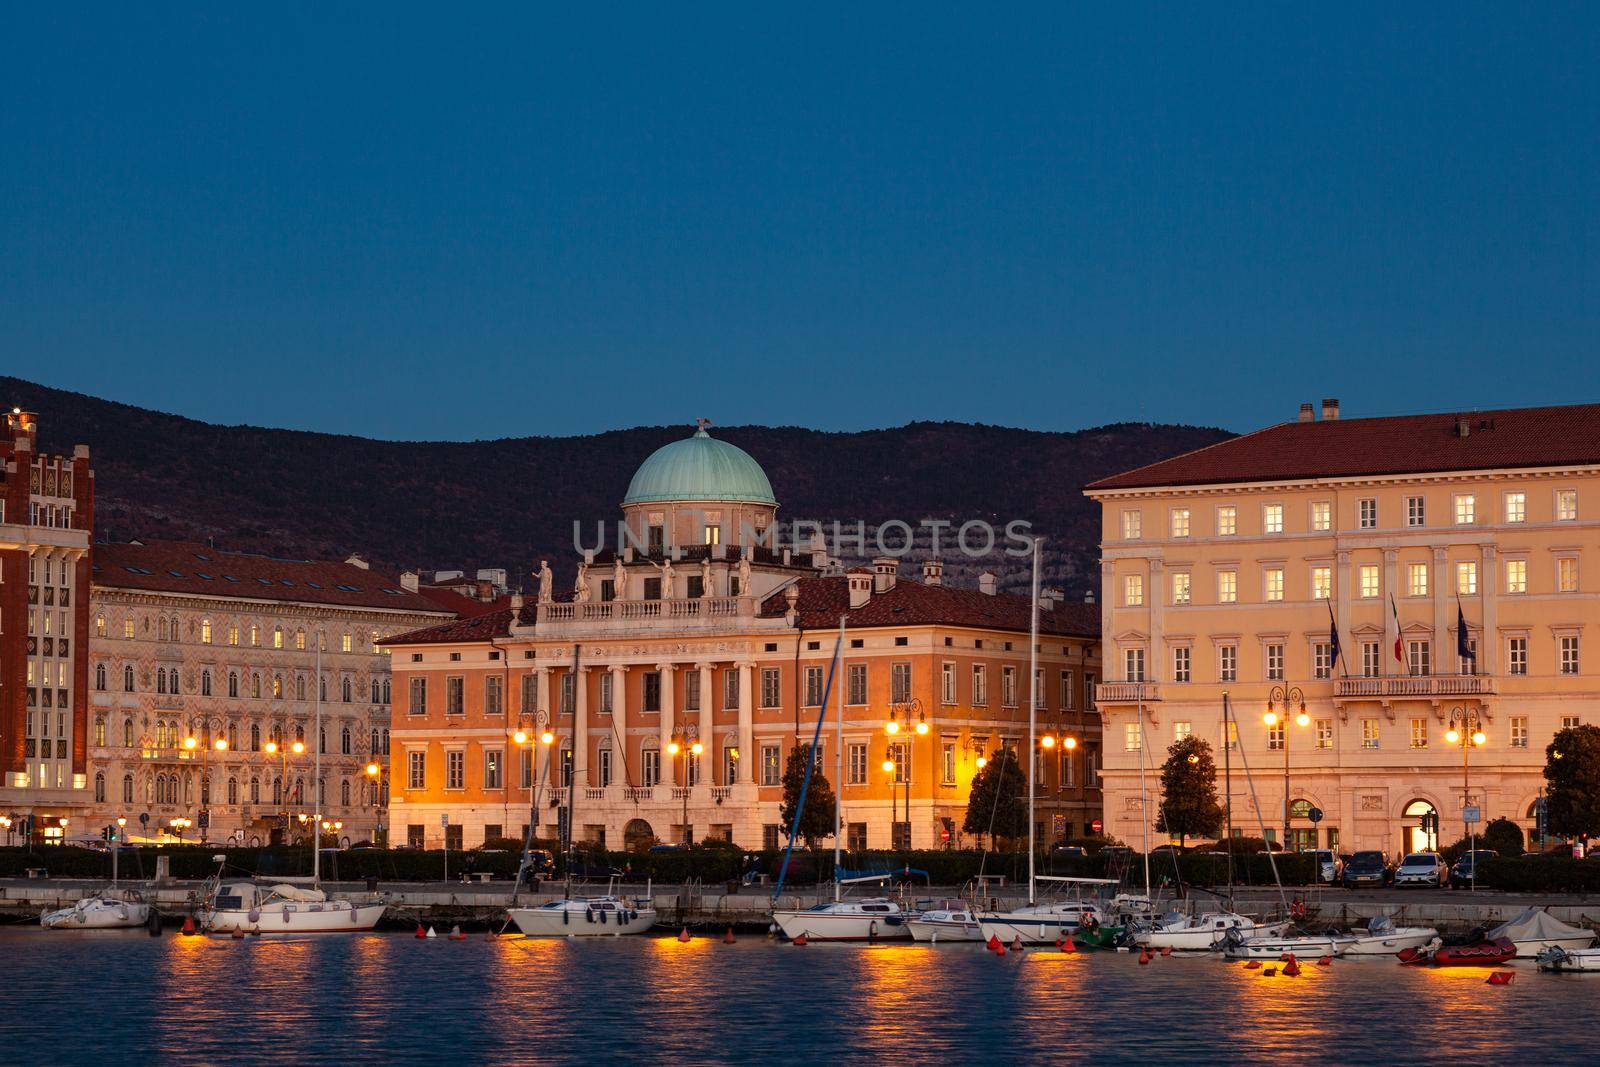 Evening view of the Palazzo Carciotti in Trieste, Italy